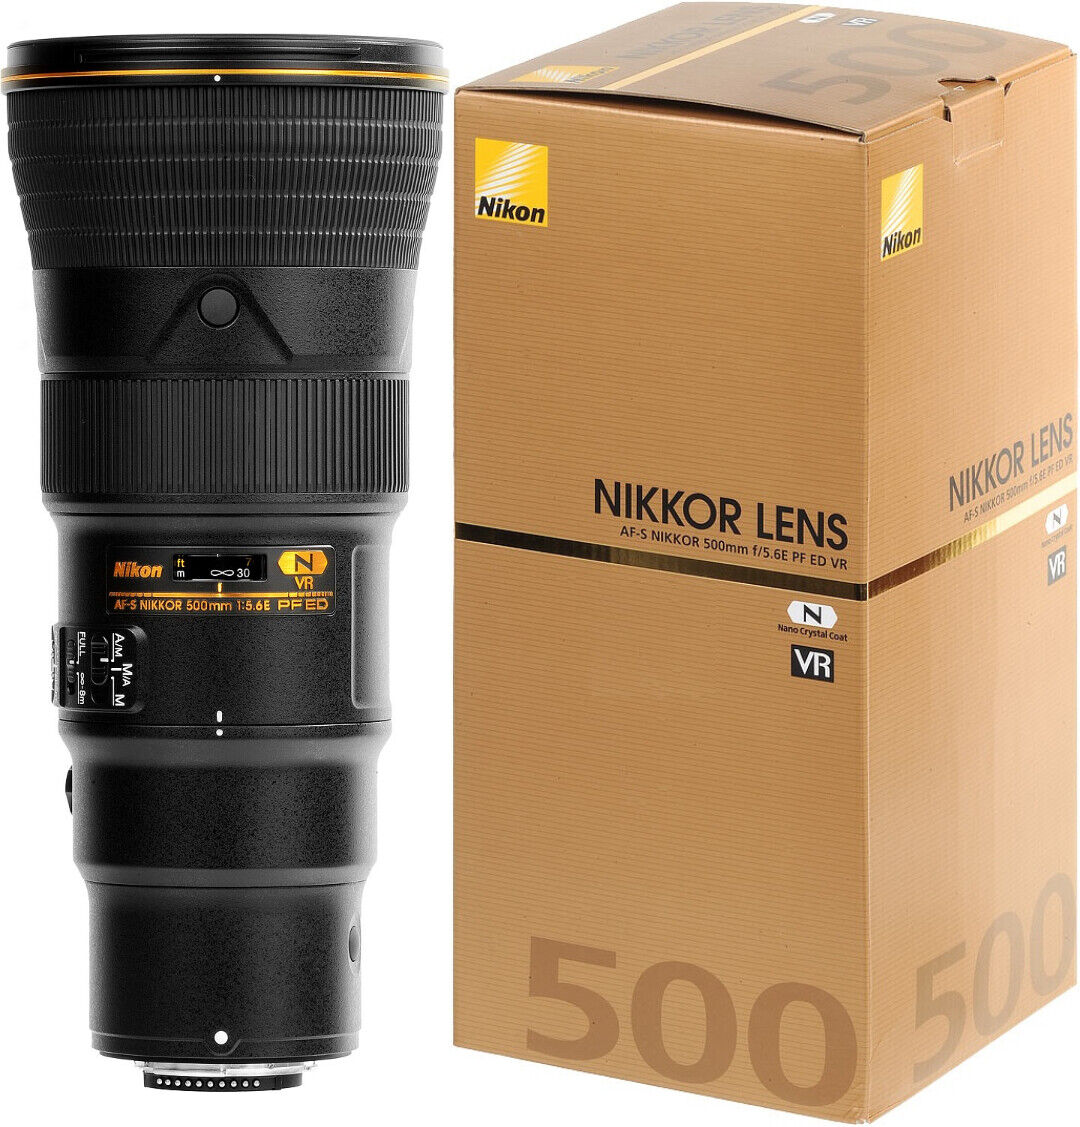 NEW. Nikon AF-S 500mm f/5.6E PF ED VR - 2 Years Warranty - Next Day Delivery